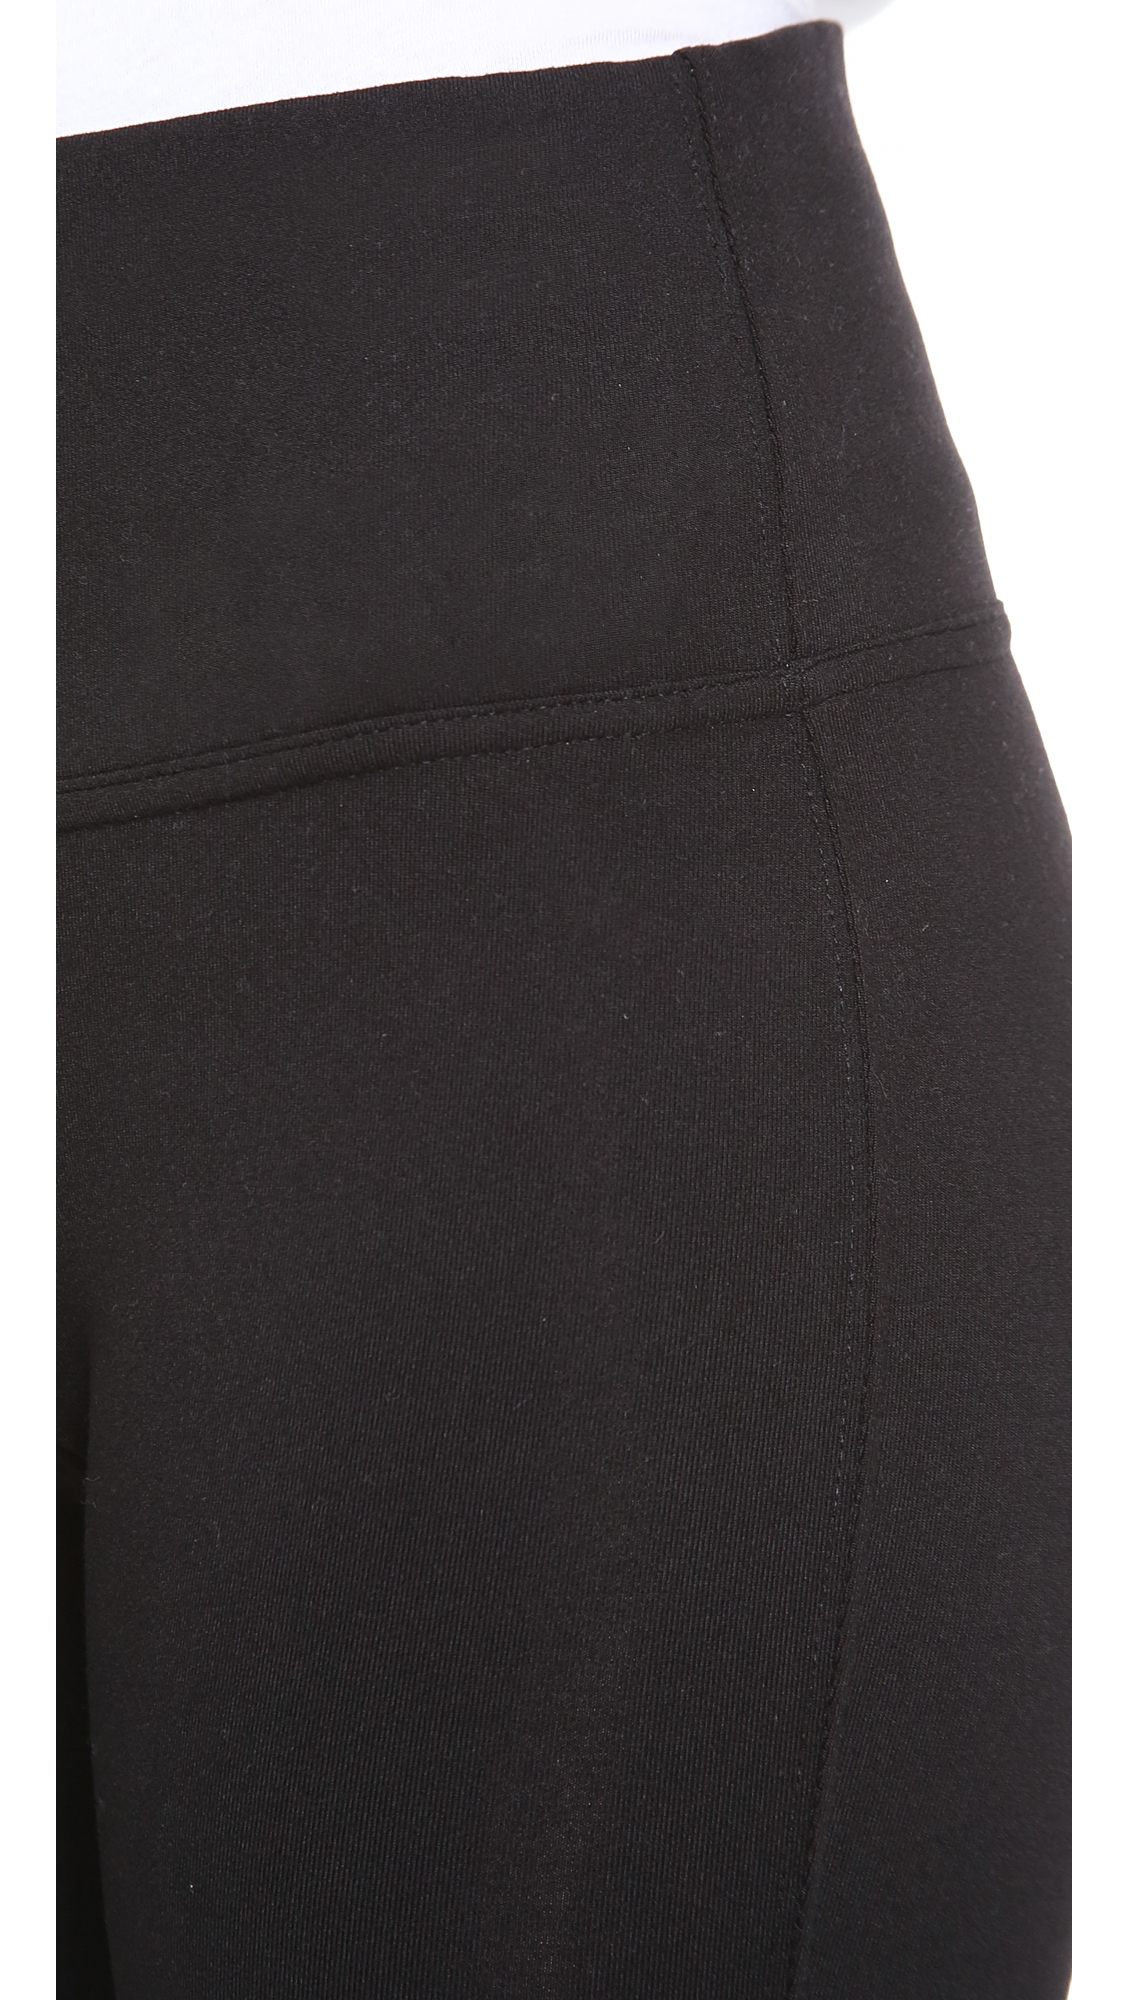 Spanx Ready To Wow! Structured Leggings - Black